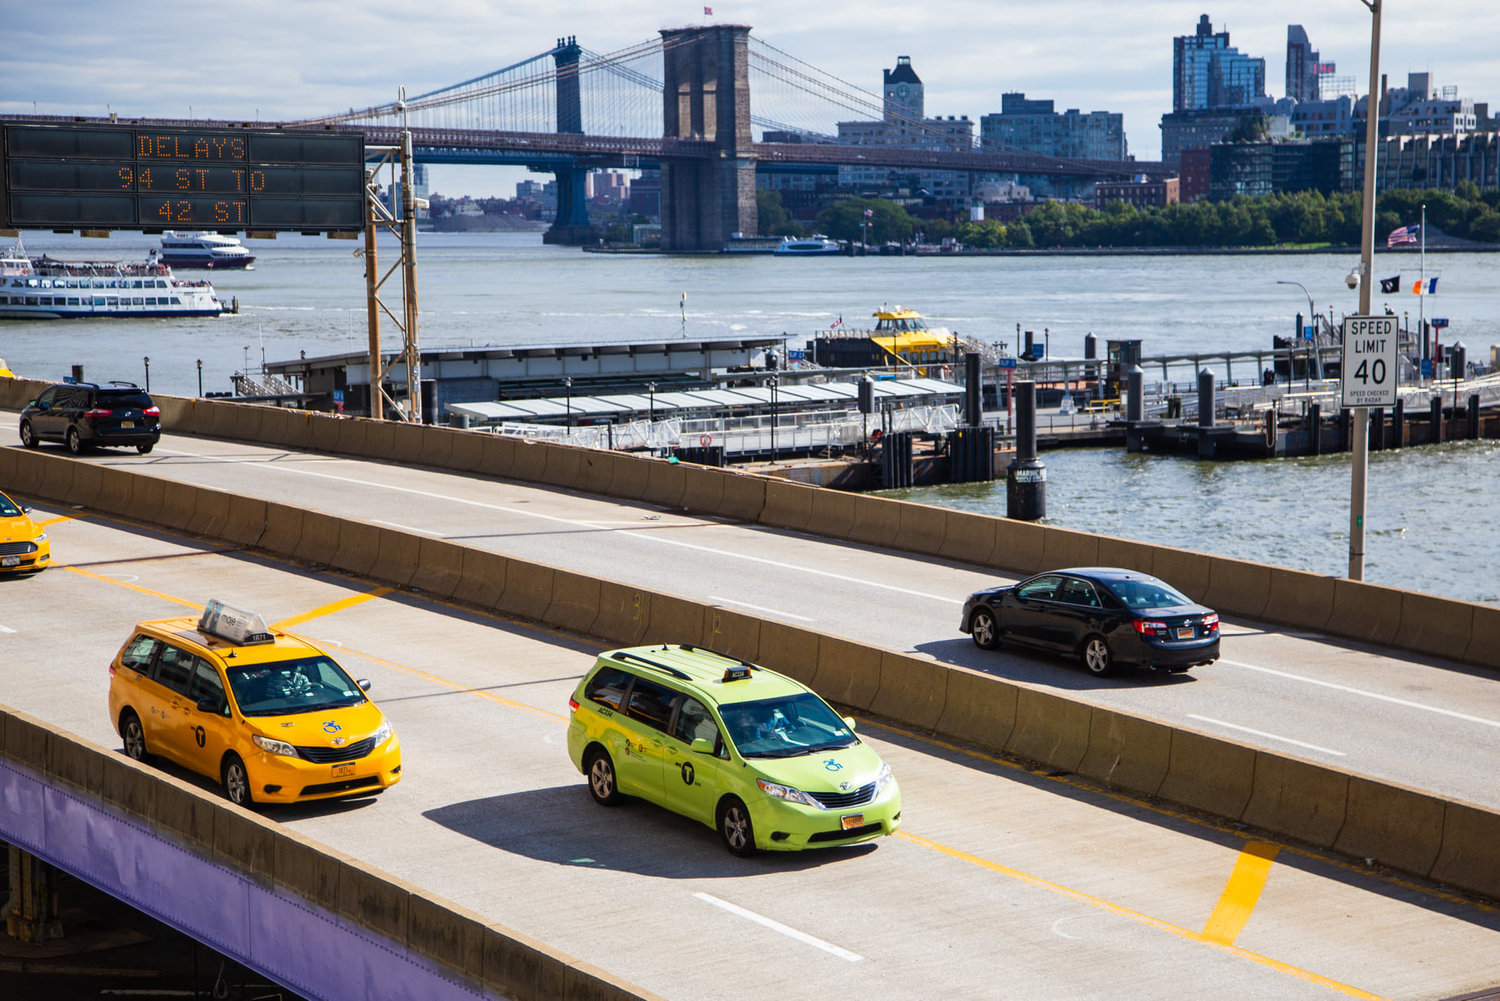 The congestion pricing’s tolling zone would cover Manhattan’s 60th Street and all the roadways south except for FDR Drive, above, as well as the West Side Highway/9A and a few other arteries. But taxi and ride-share drivers nonetheless fear they will be unjustly burdened by tolls that could reach as high as $23.